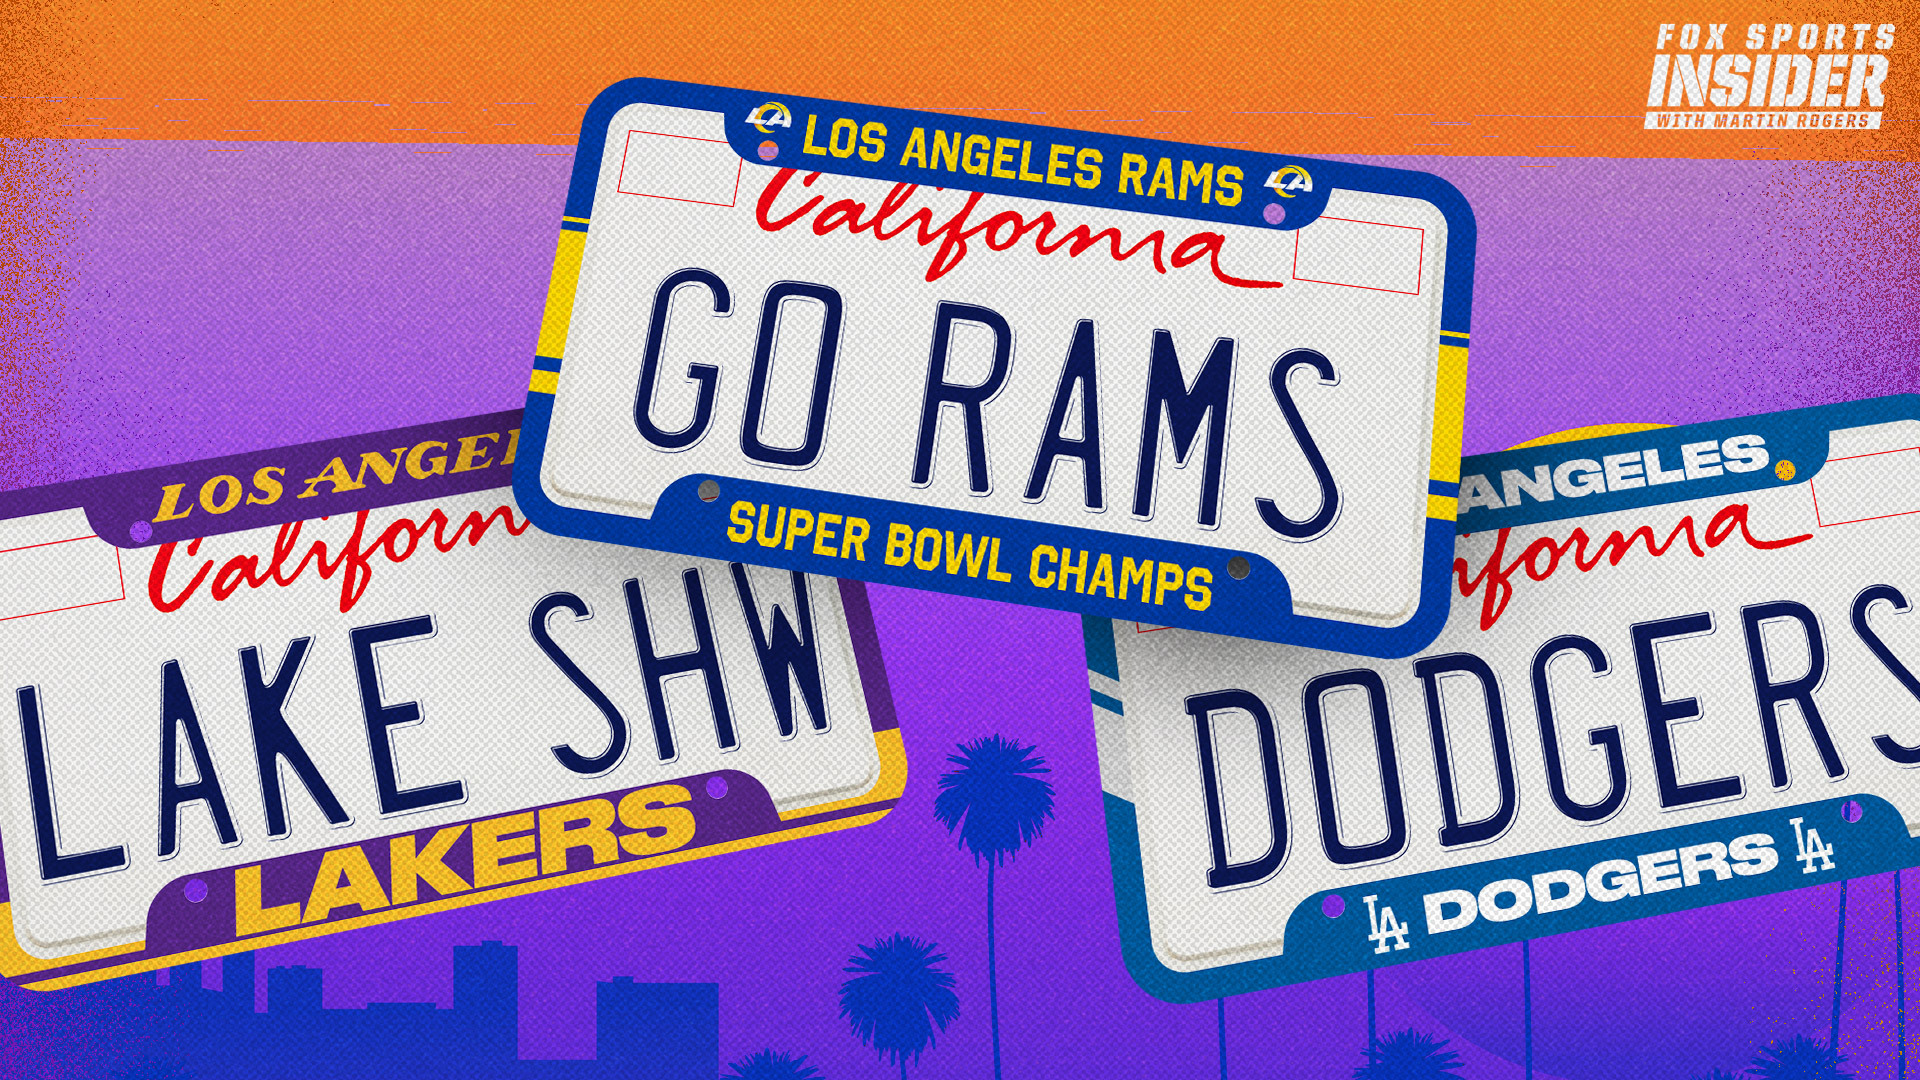 How the Rams found their place in the L.A. sports scene